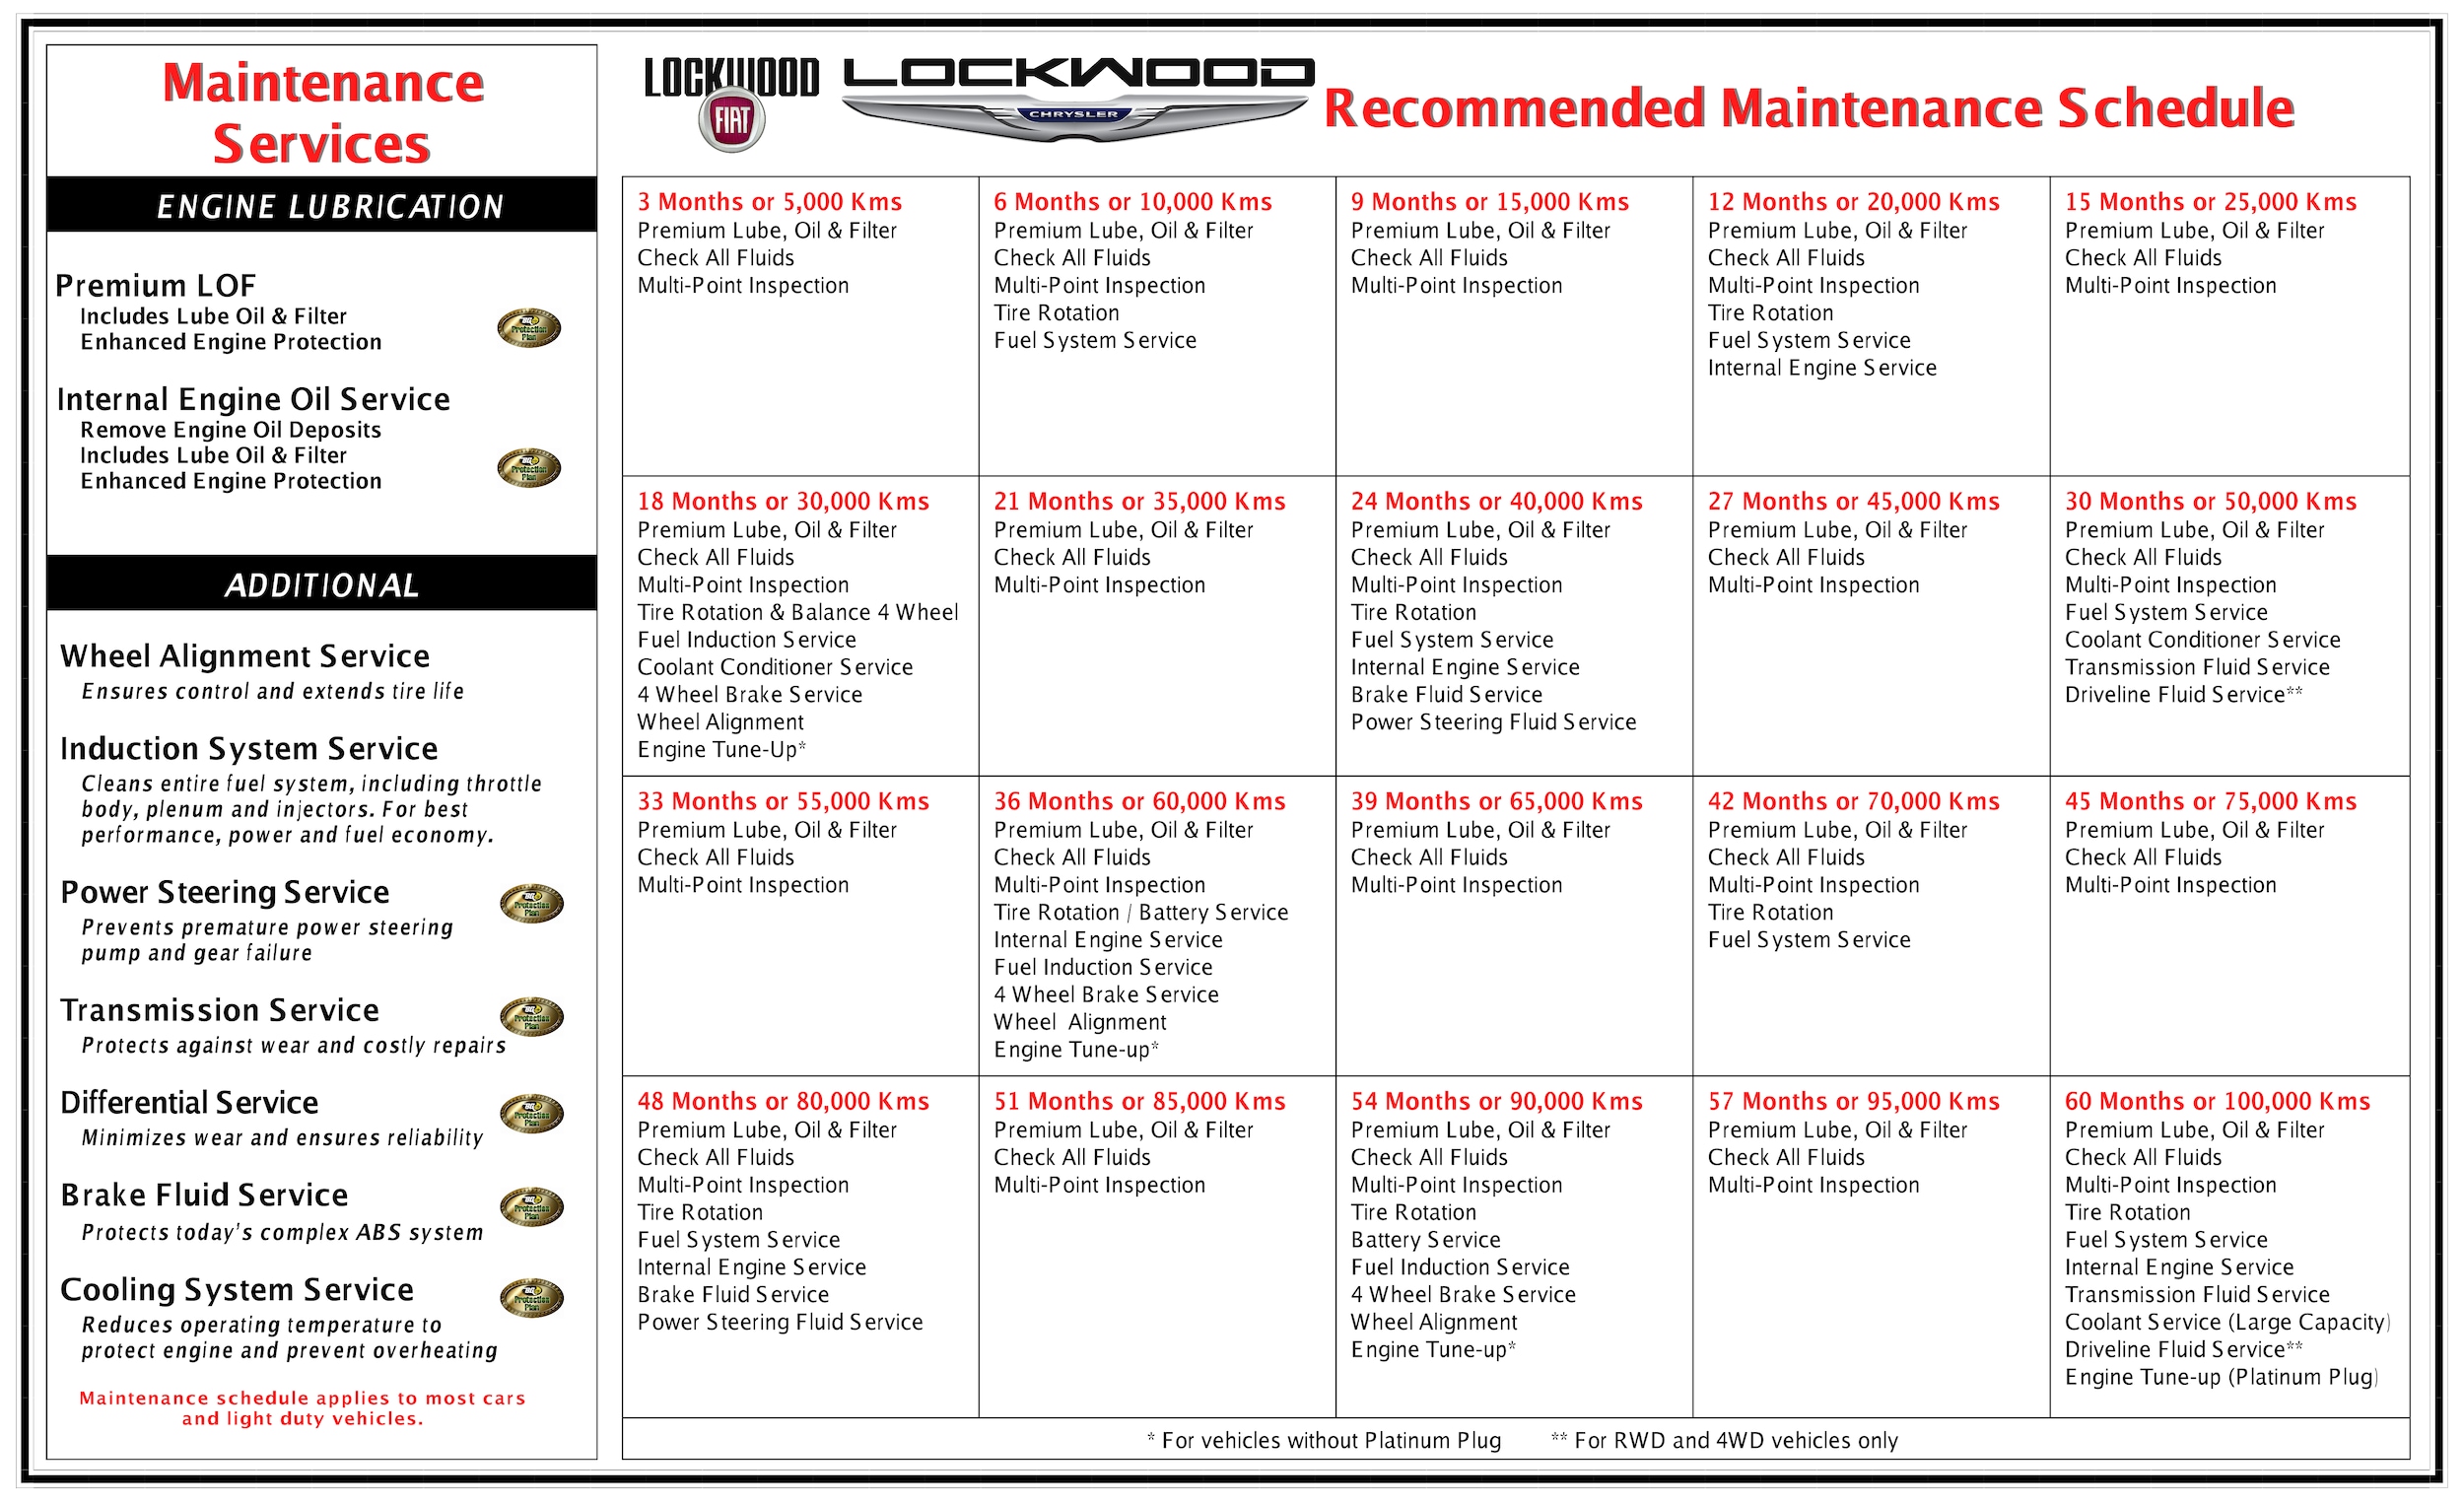 Chrysler recommended service schedule #4